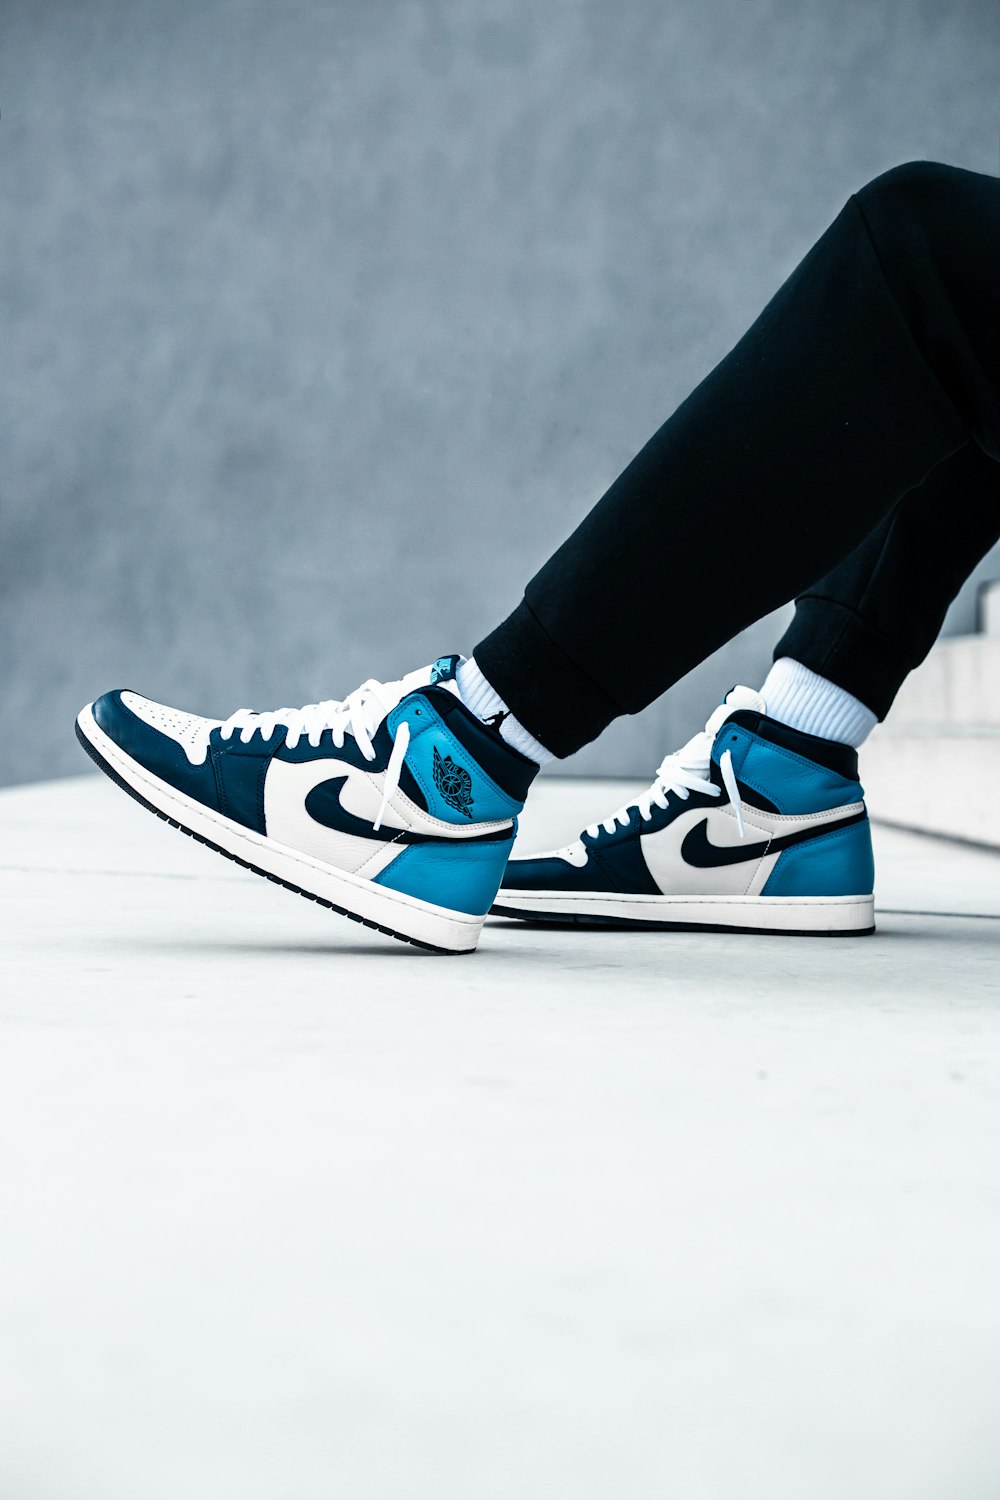 person wearing black pants and blue and white nike sneakers photo – Free  Slovensko Image on Unsplash